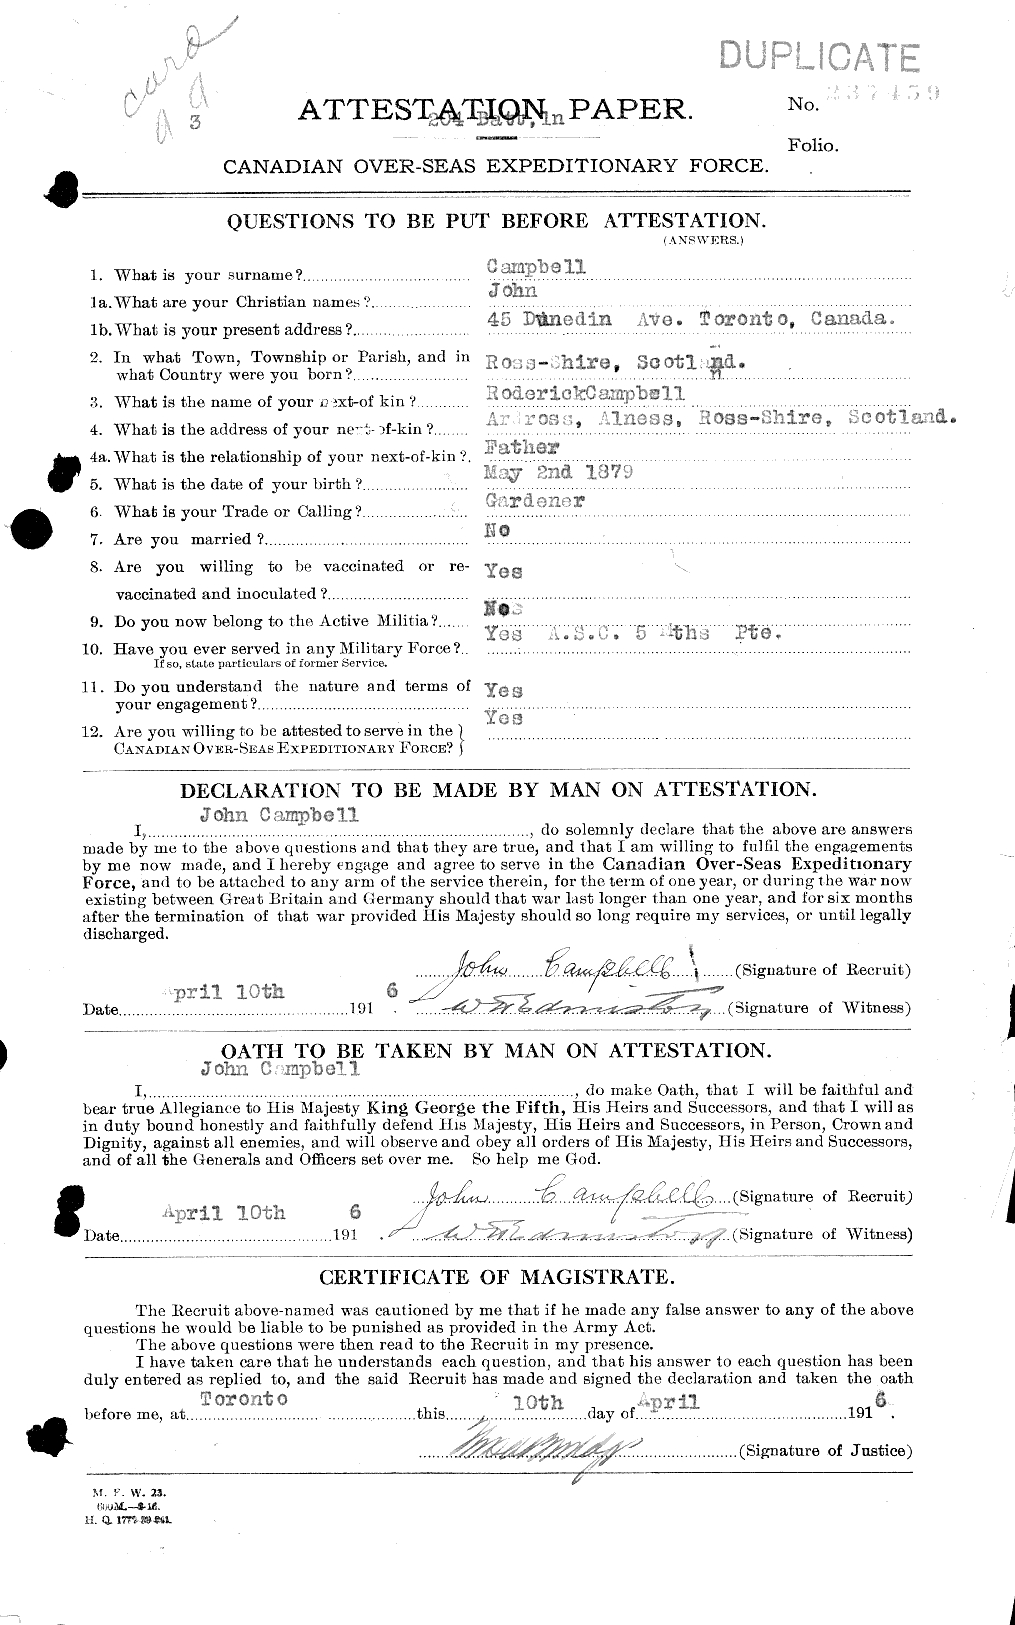 Personnel Records of the First World War - CEF 006820a